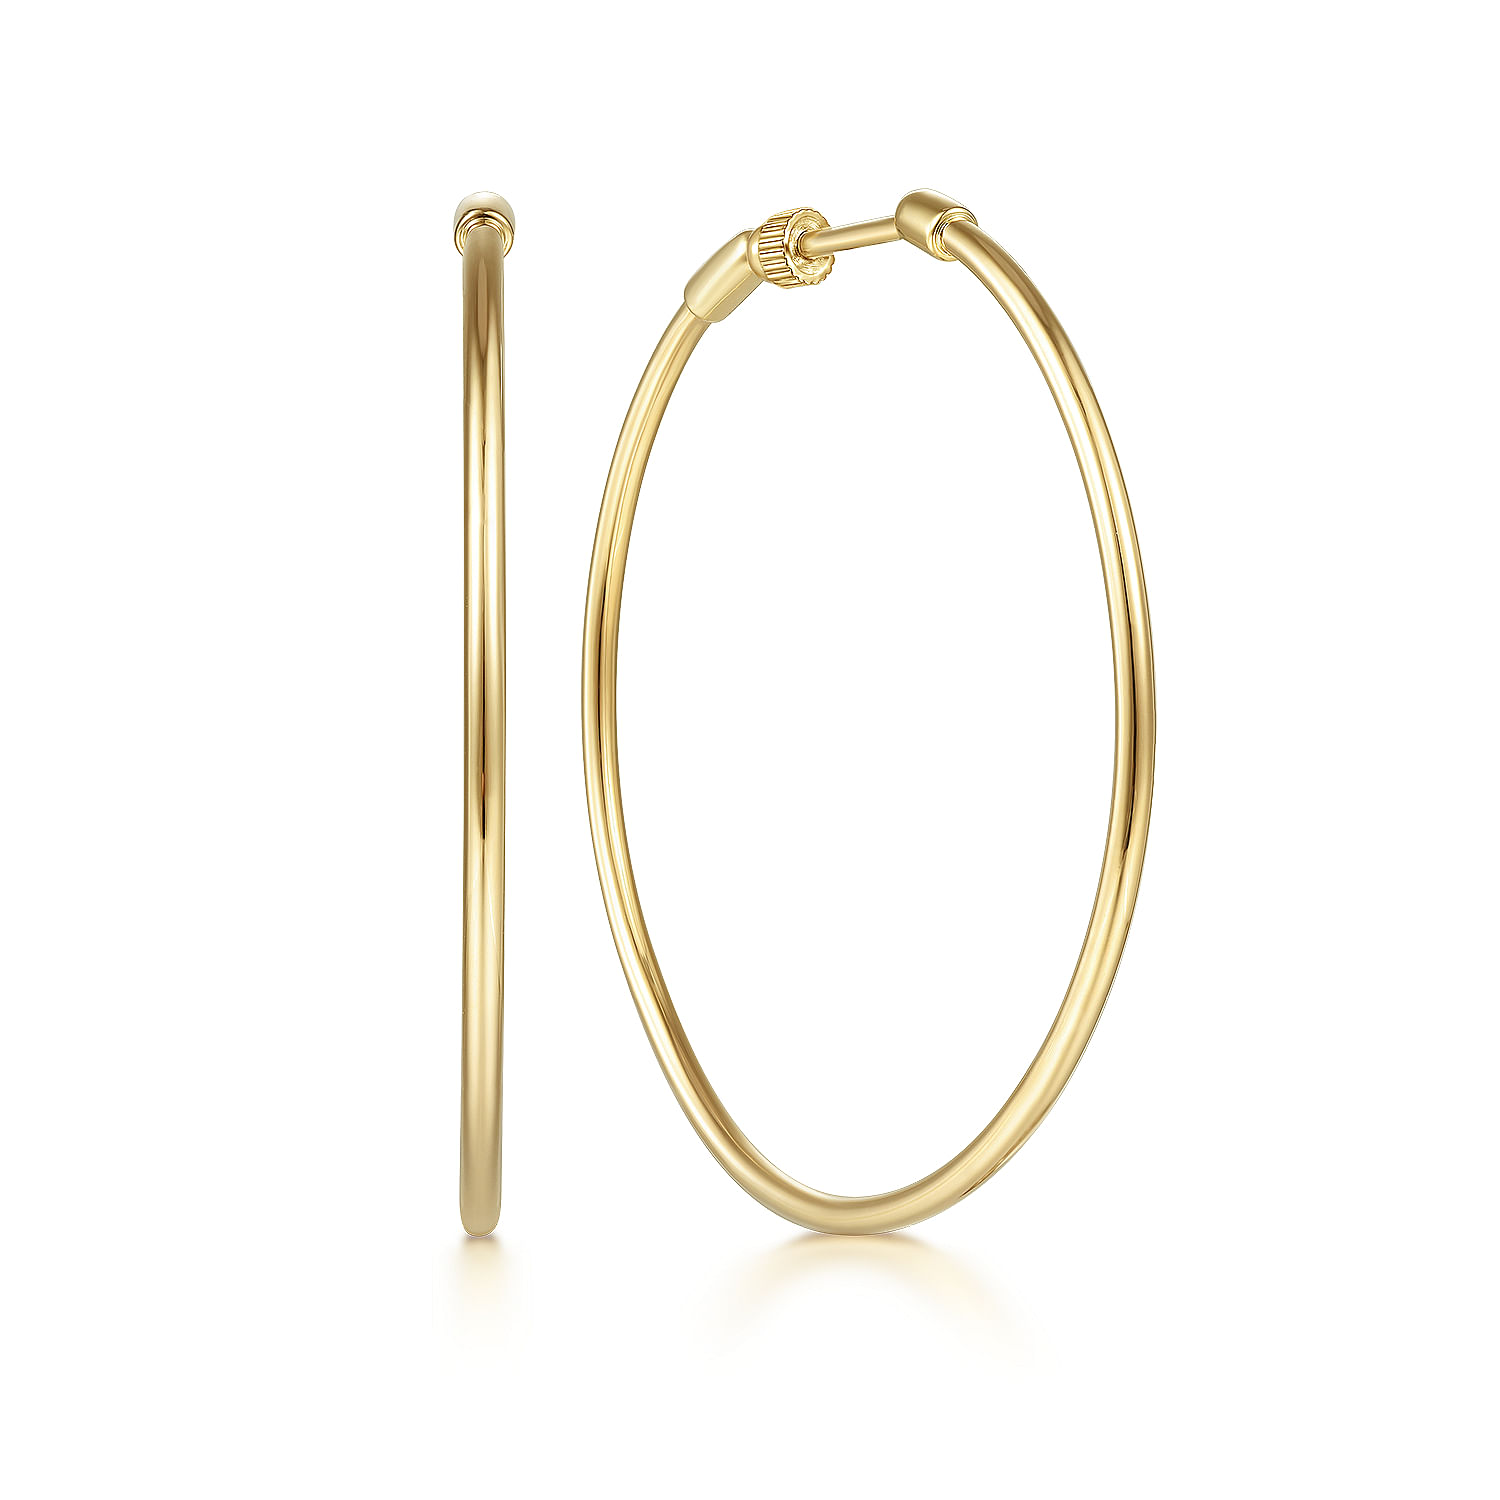 14K-Yellow-Gold-40mm-Round-Classic-Hoop-Earrings1